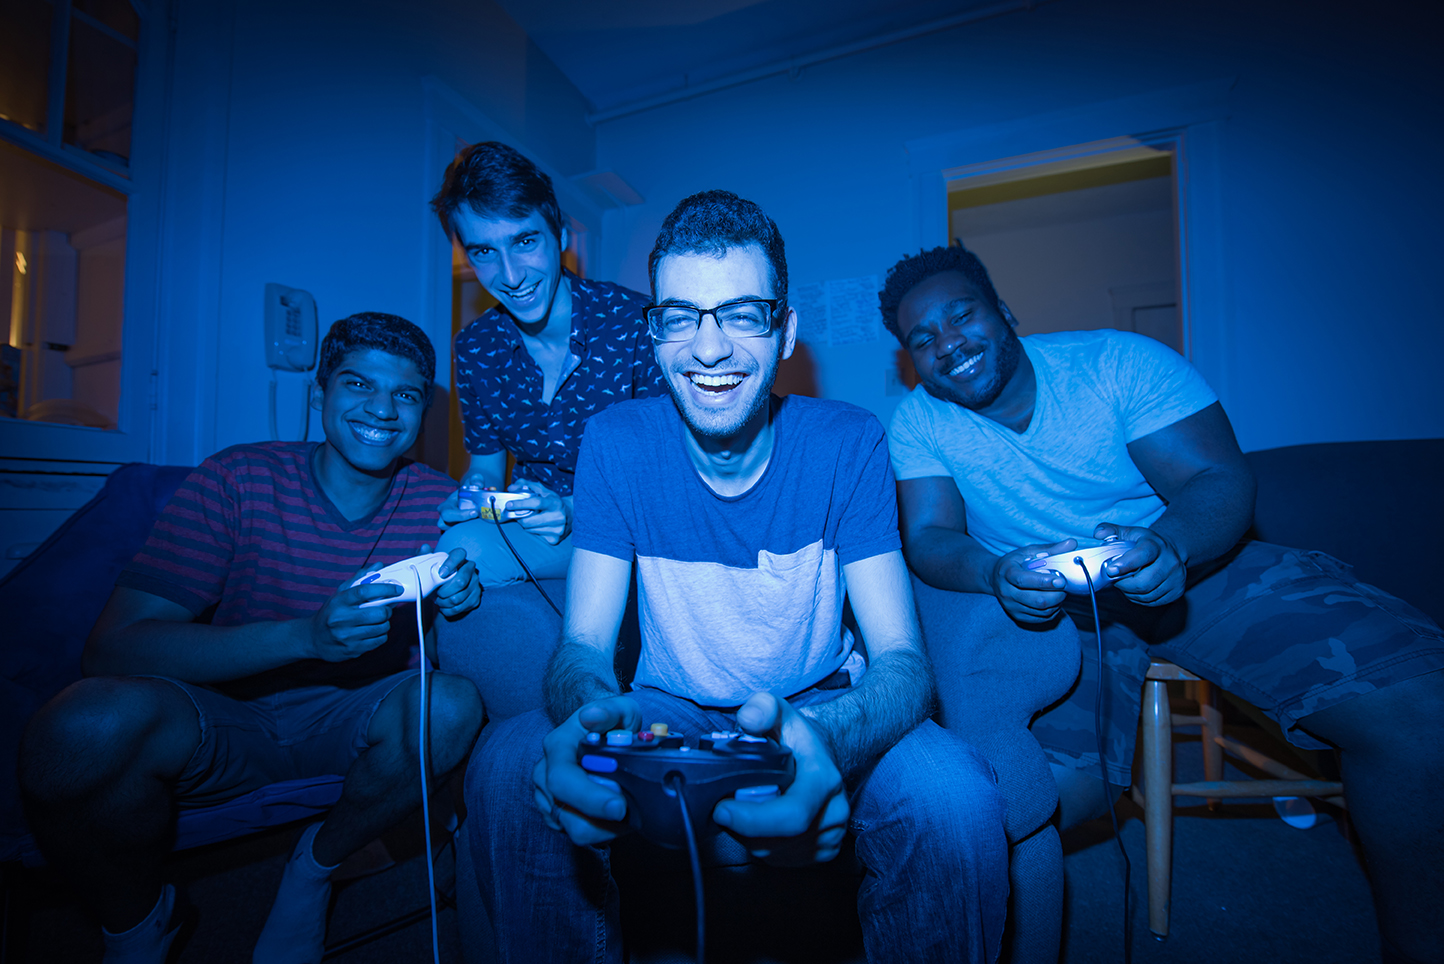 students playing video games